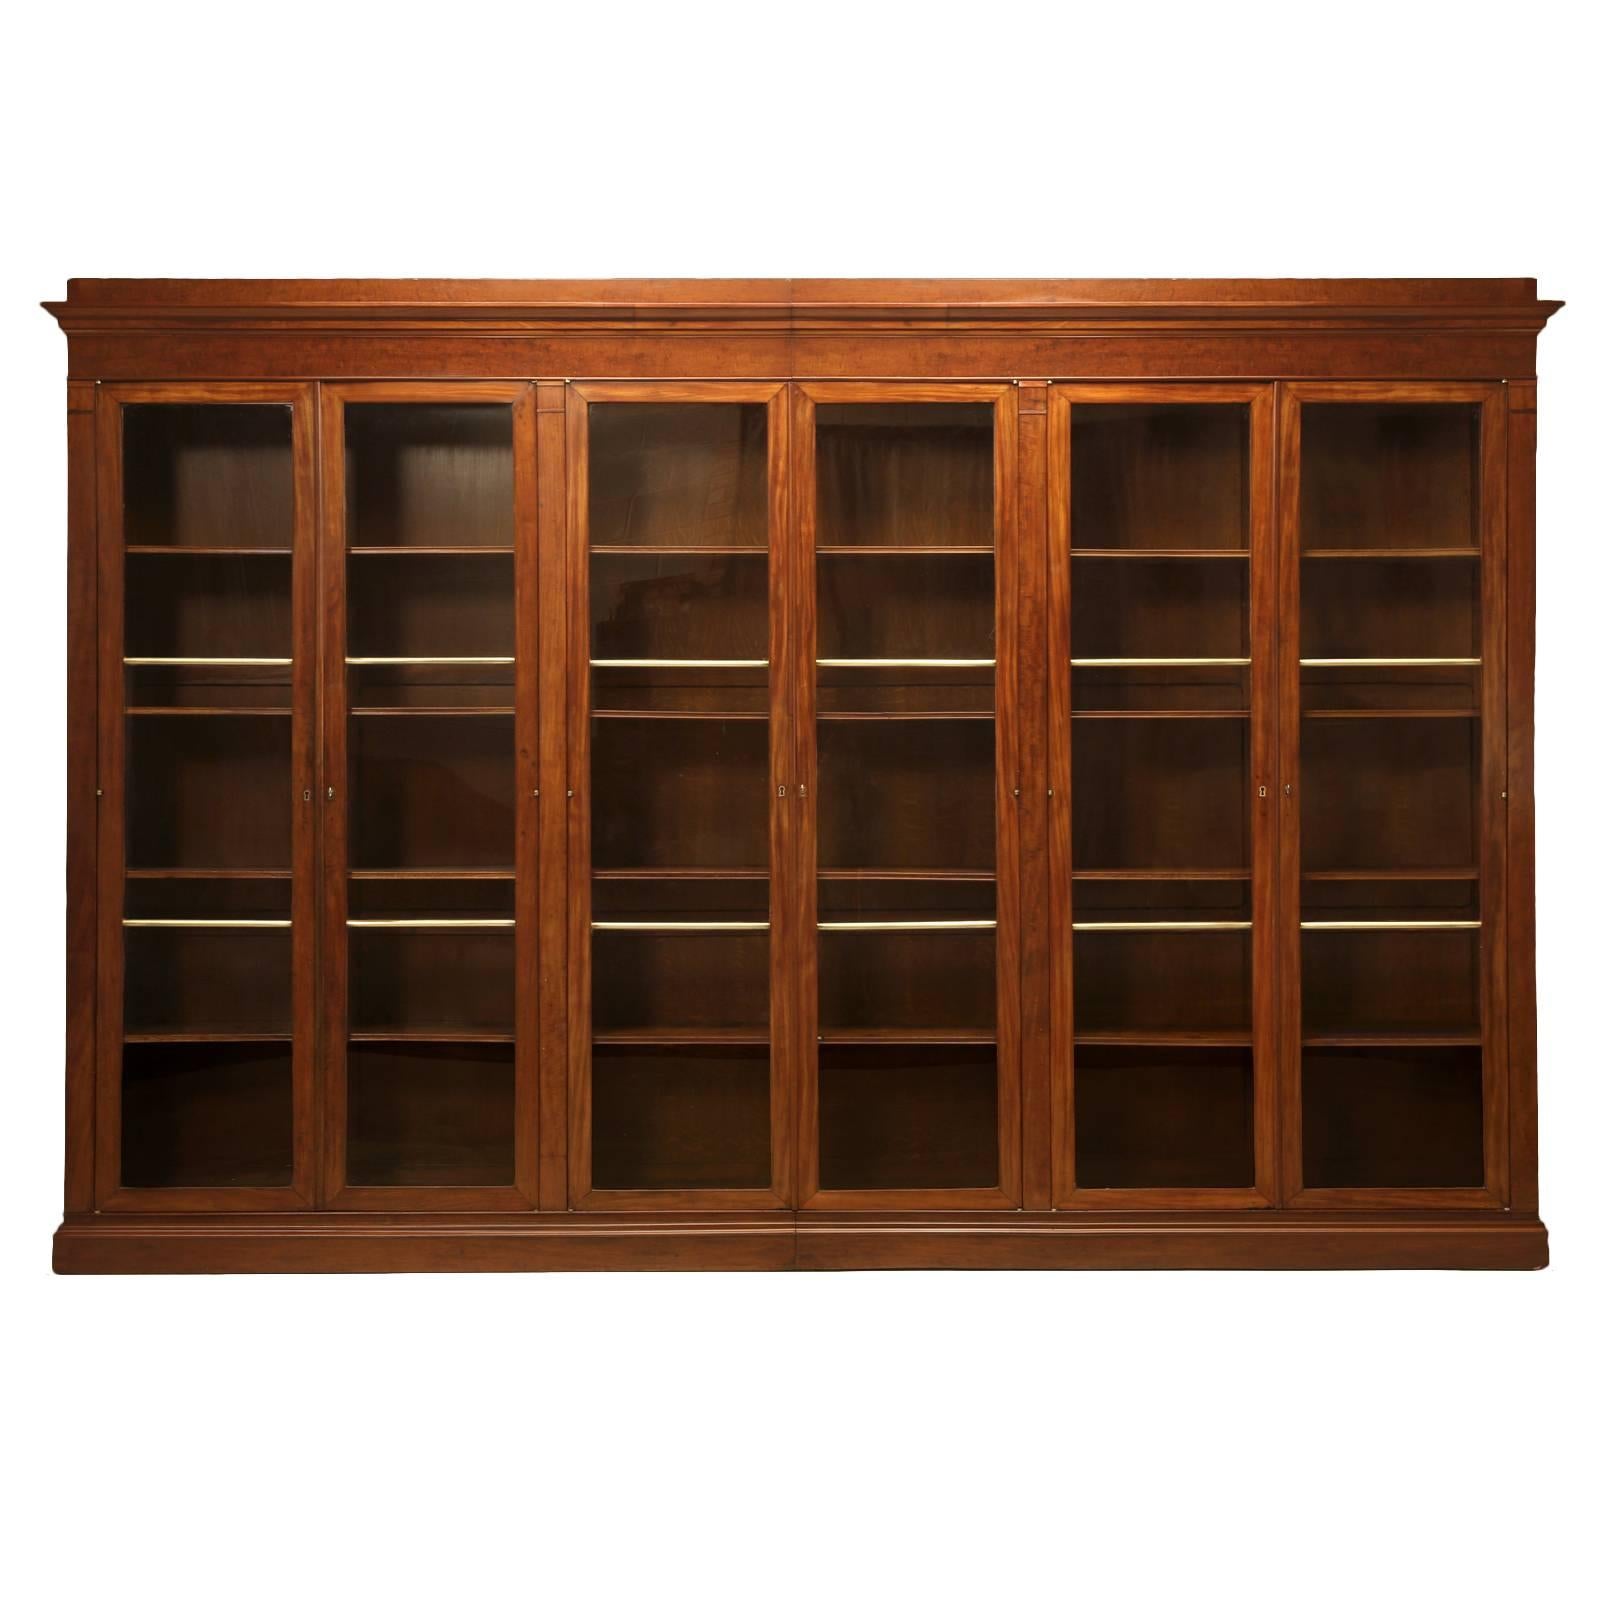 Antique French Bookcase or Display Cabinet, circa 1815-1830